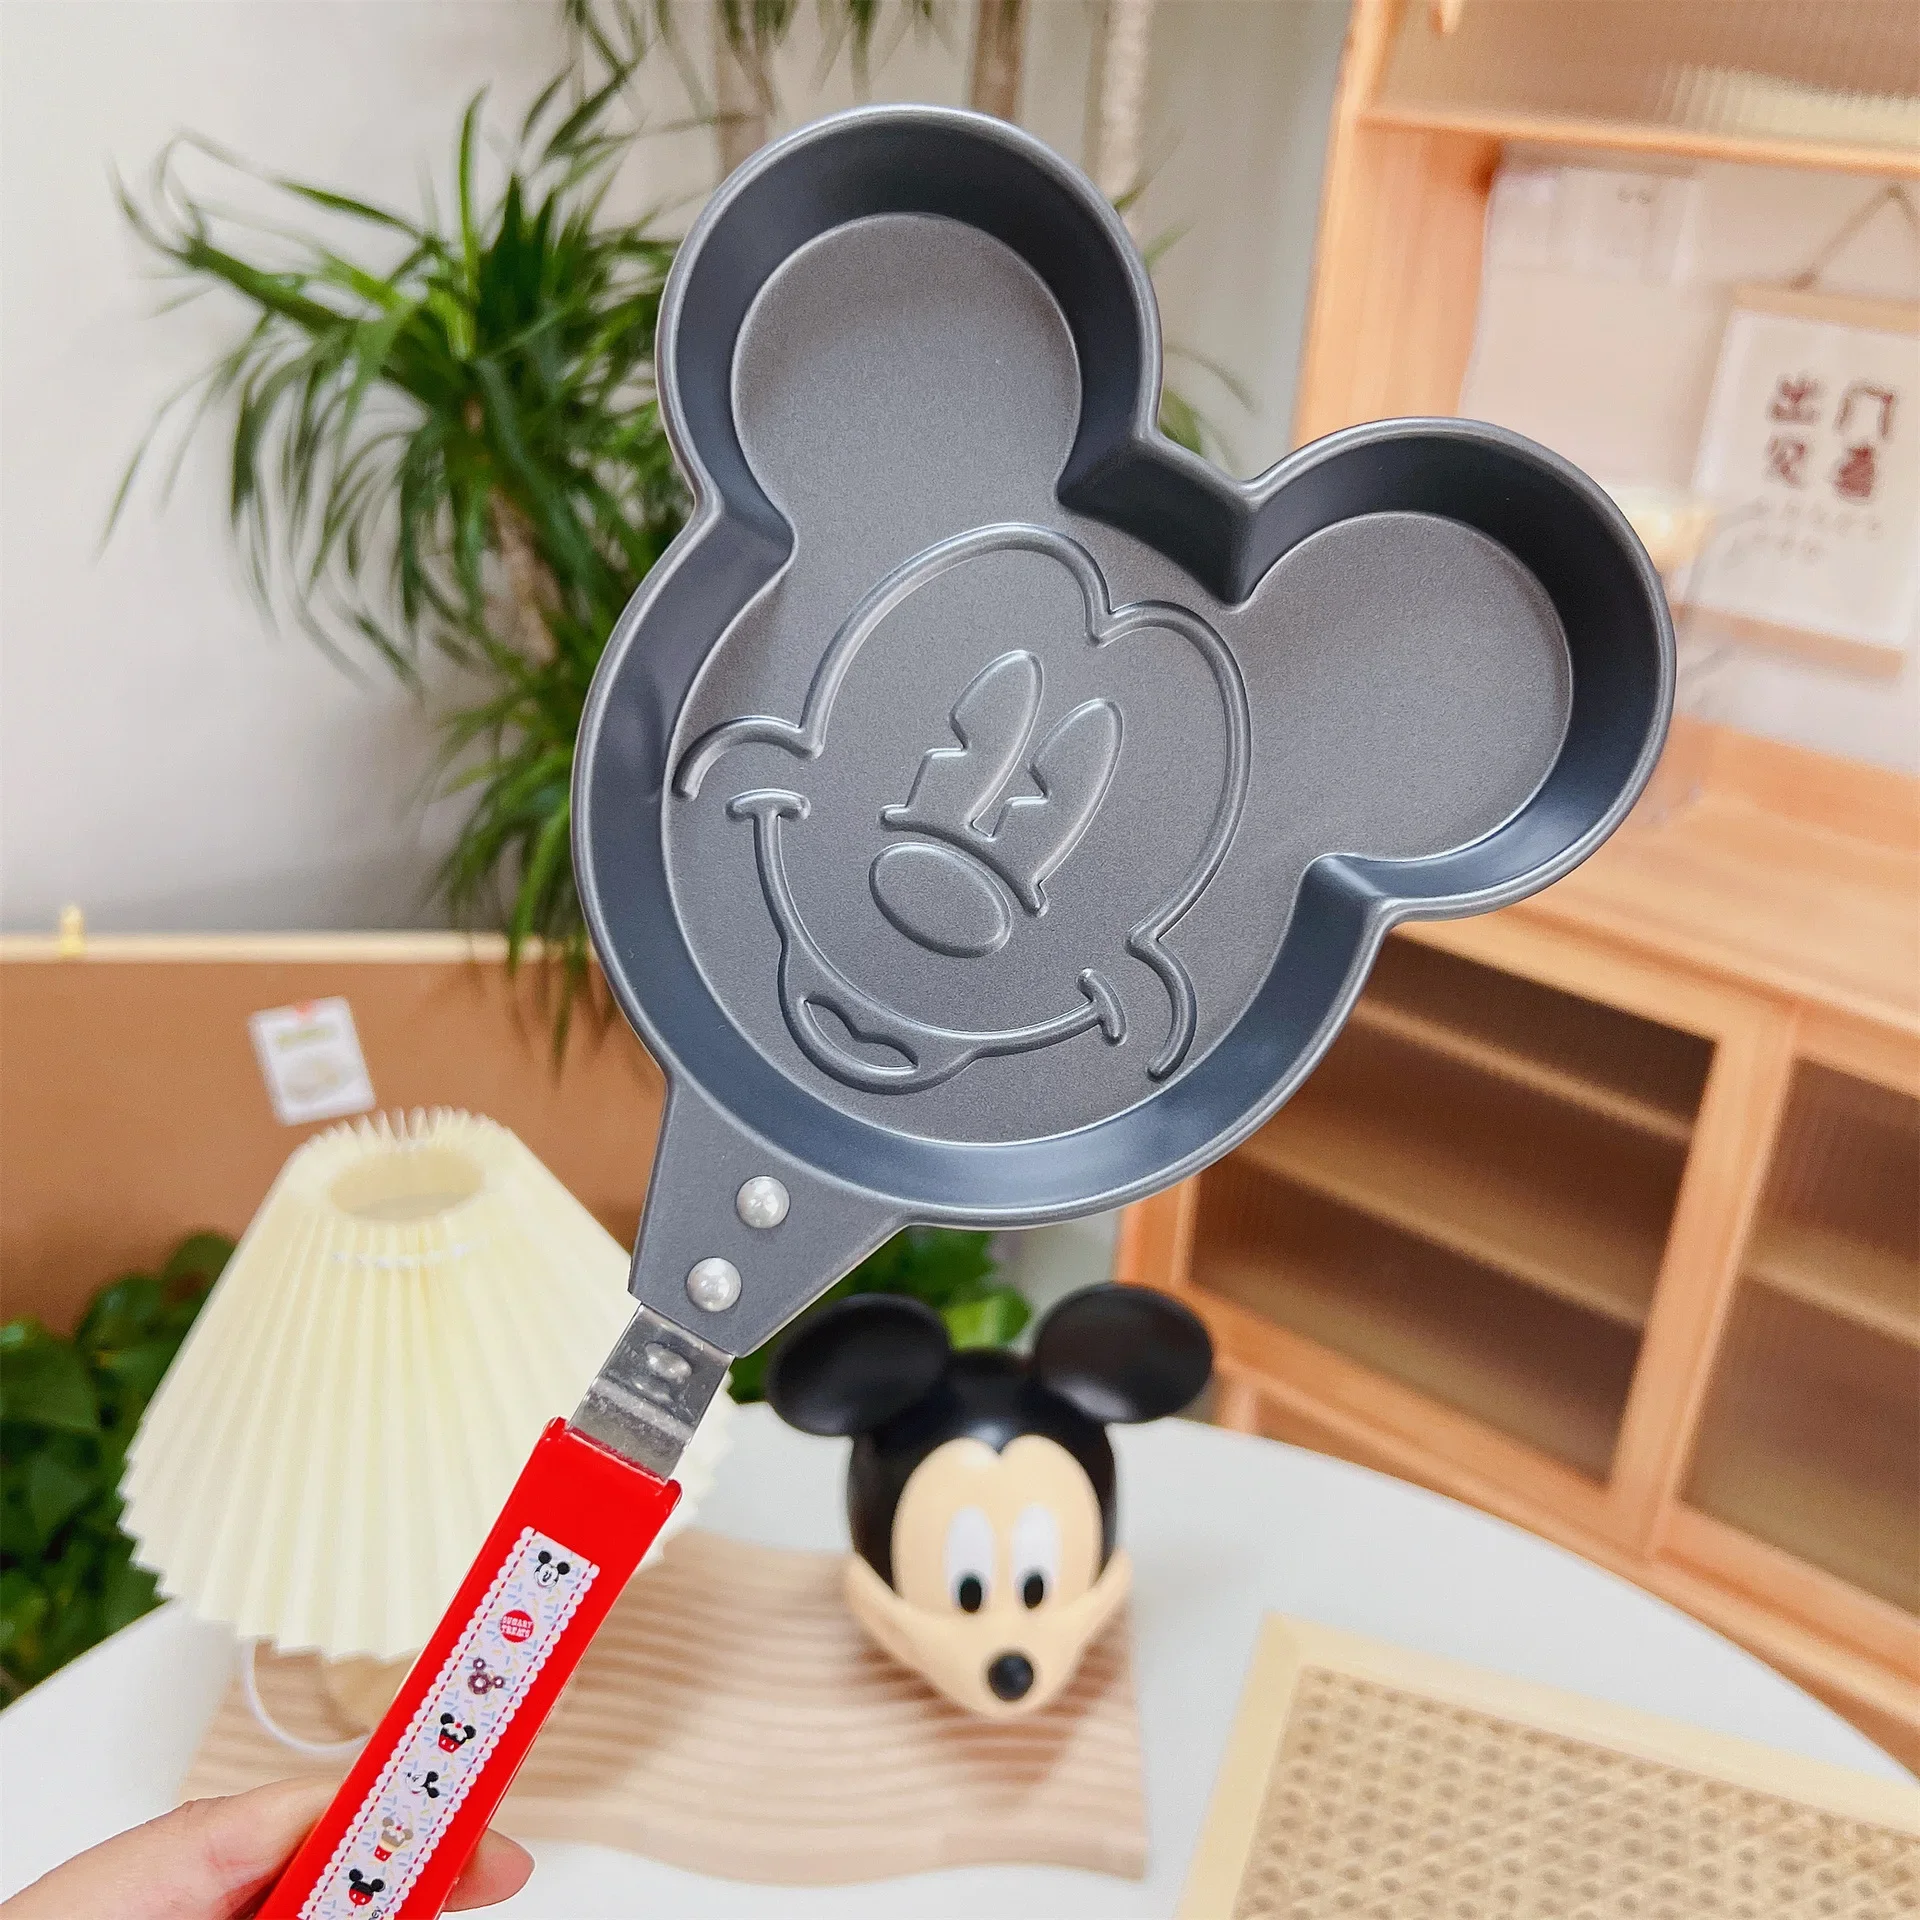 

Disney Cute Skillet Anime Mickey Minnie Stitch Muffin Pan Picnic Camping Can Open Fire Induction Cooker Skillet Christmas Gift